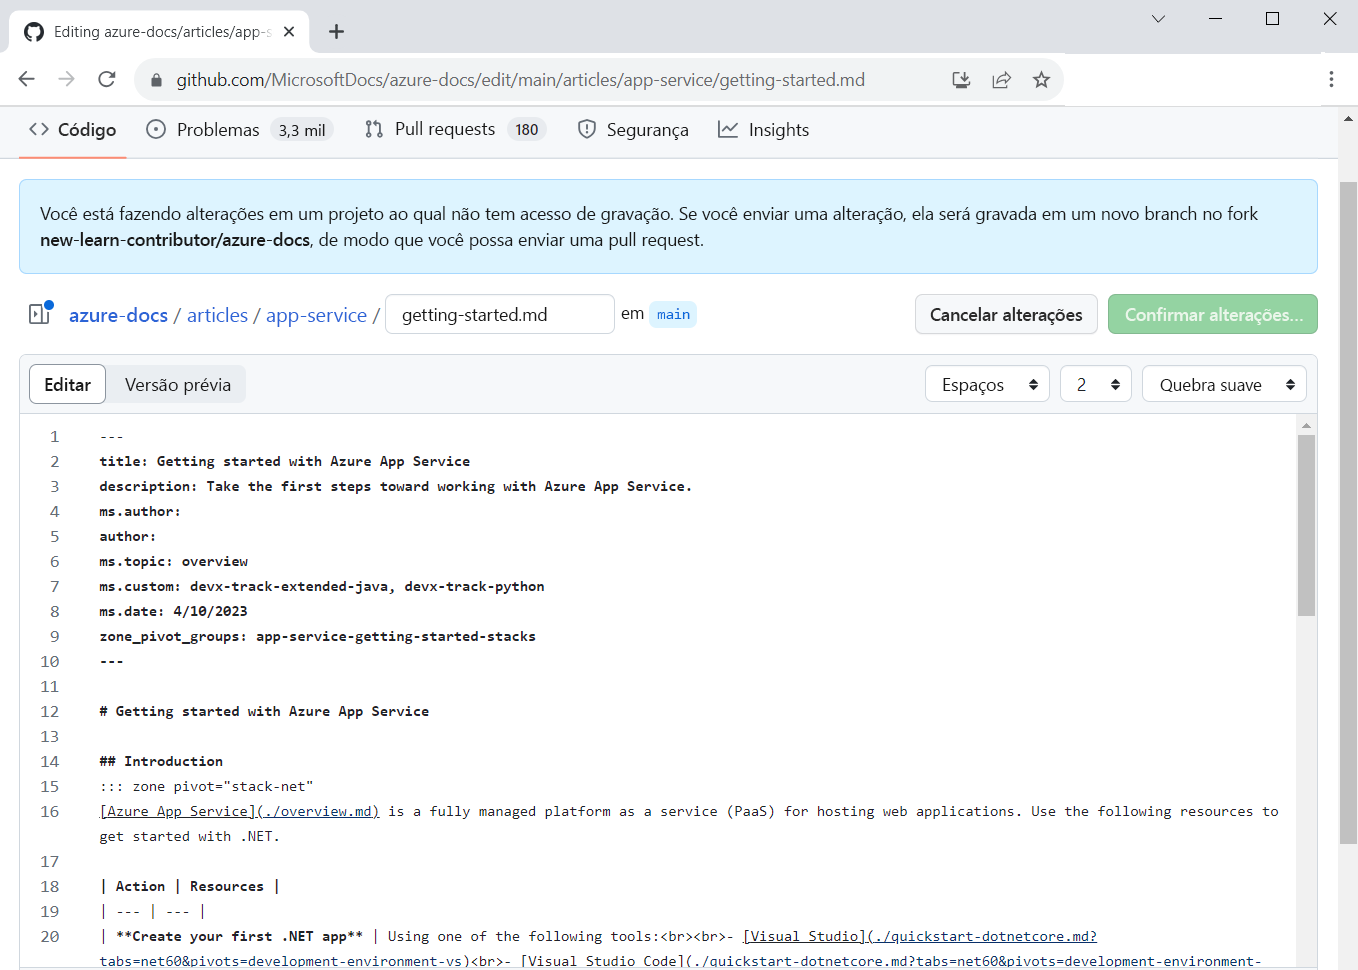 Screenshot of a browser with a documentation article written in Markdown syntax, which can be edited in the Edit pane.